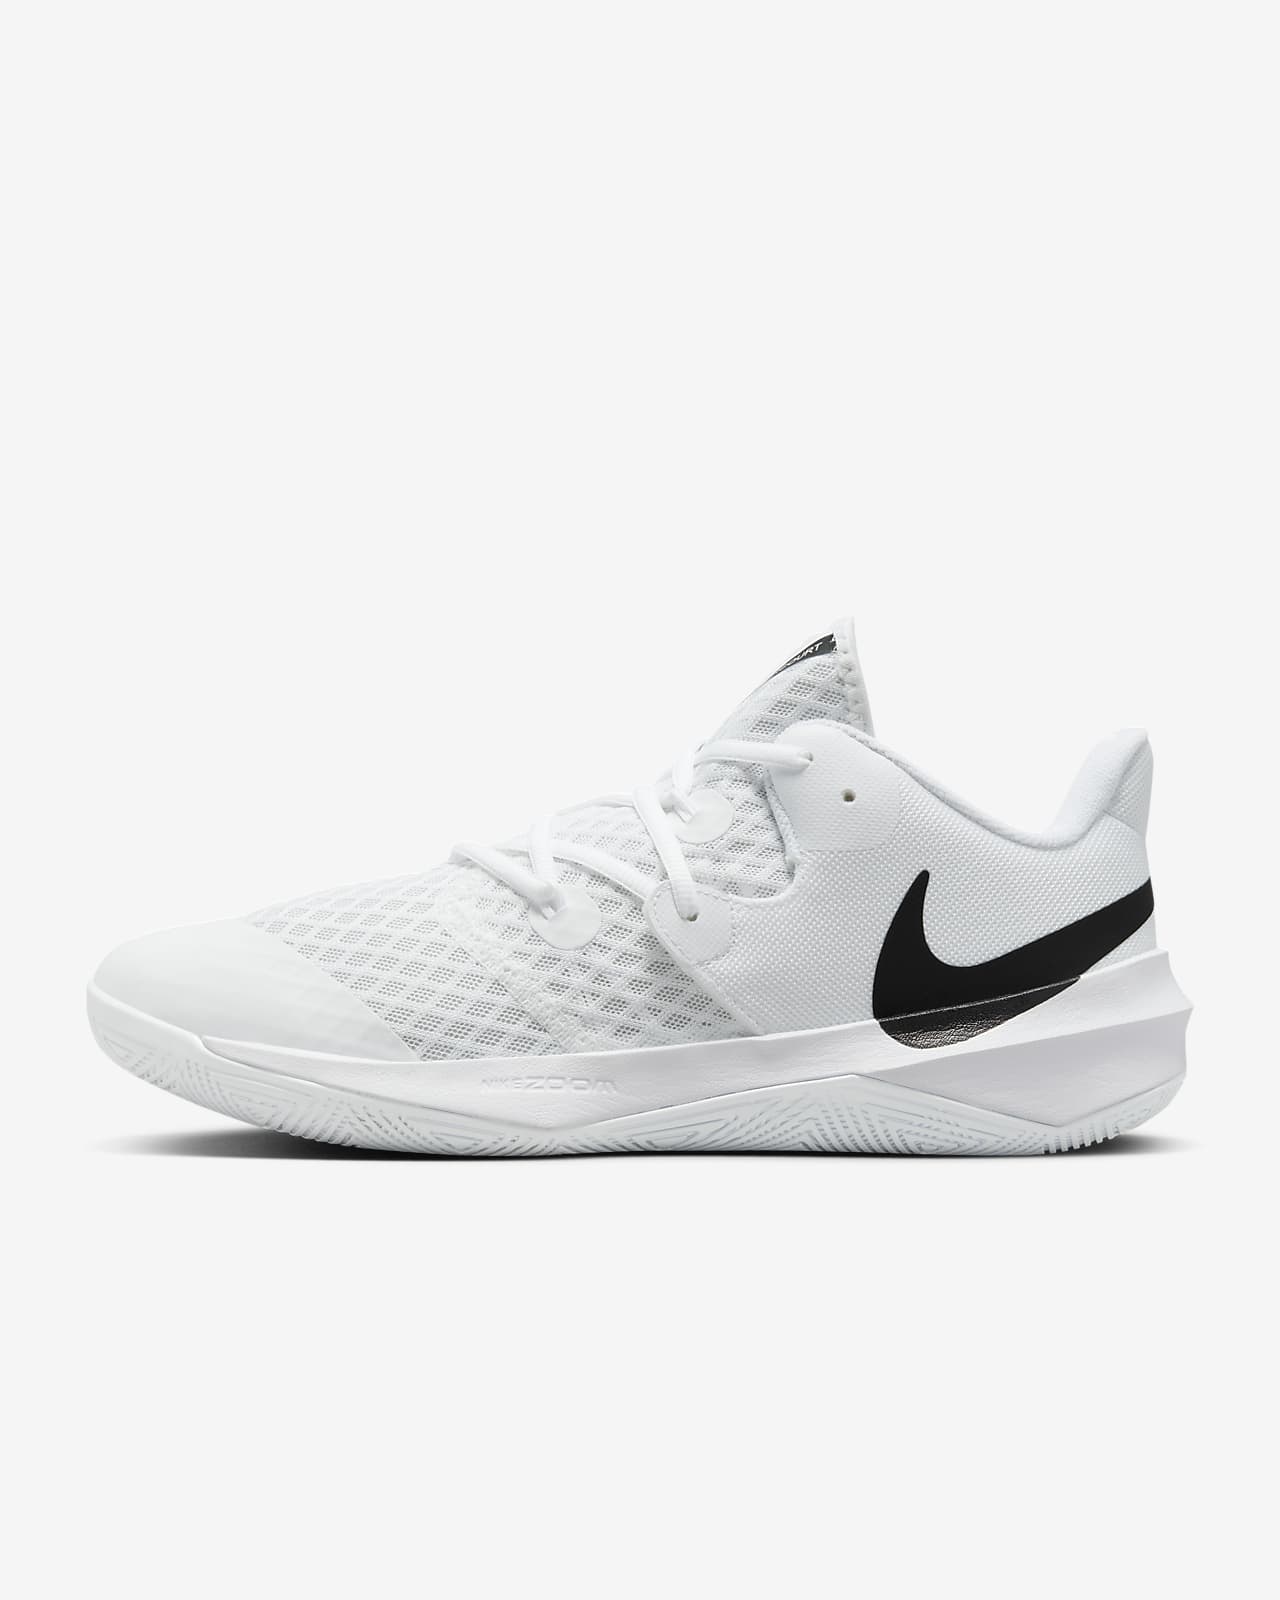 Nike Hyperspeed Court Volleyball Shoe Real Volleyball | lupon.gov.ph